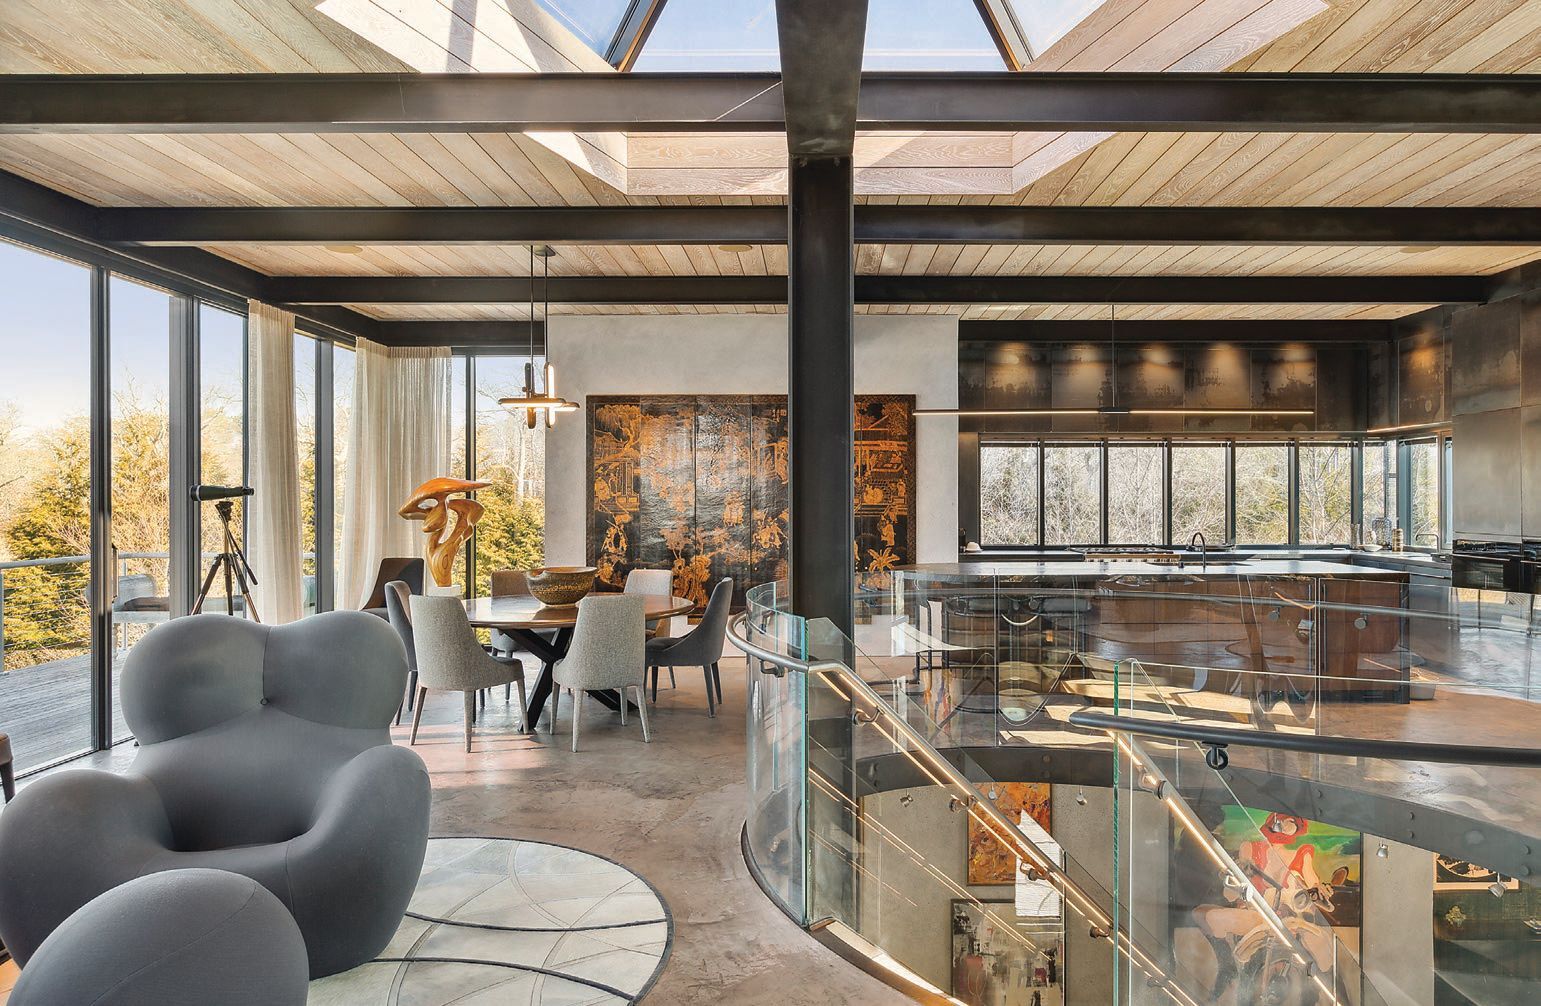 The home’s stunning interior design elements include steel beams, abundant natural light and windows that capture sunset and ocean scenery  PHOTO BY RISE MEDIA/COURTESY OF DOUGLAS ELLIMAN